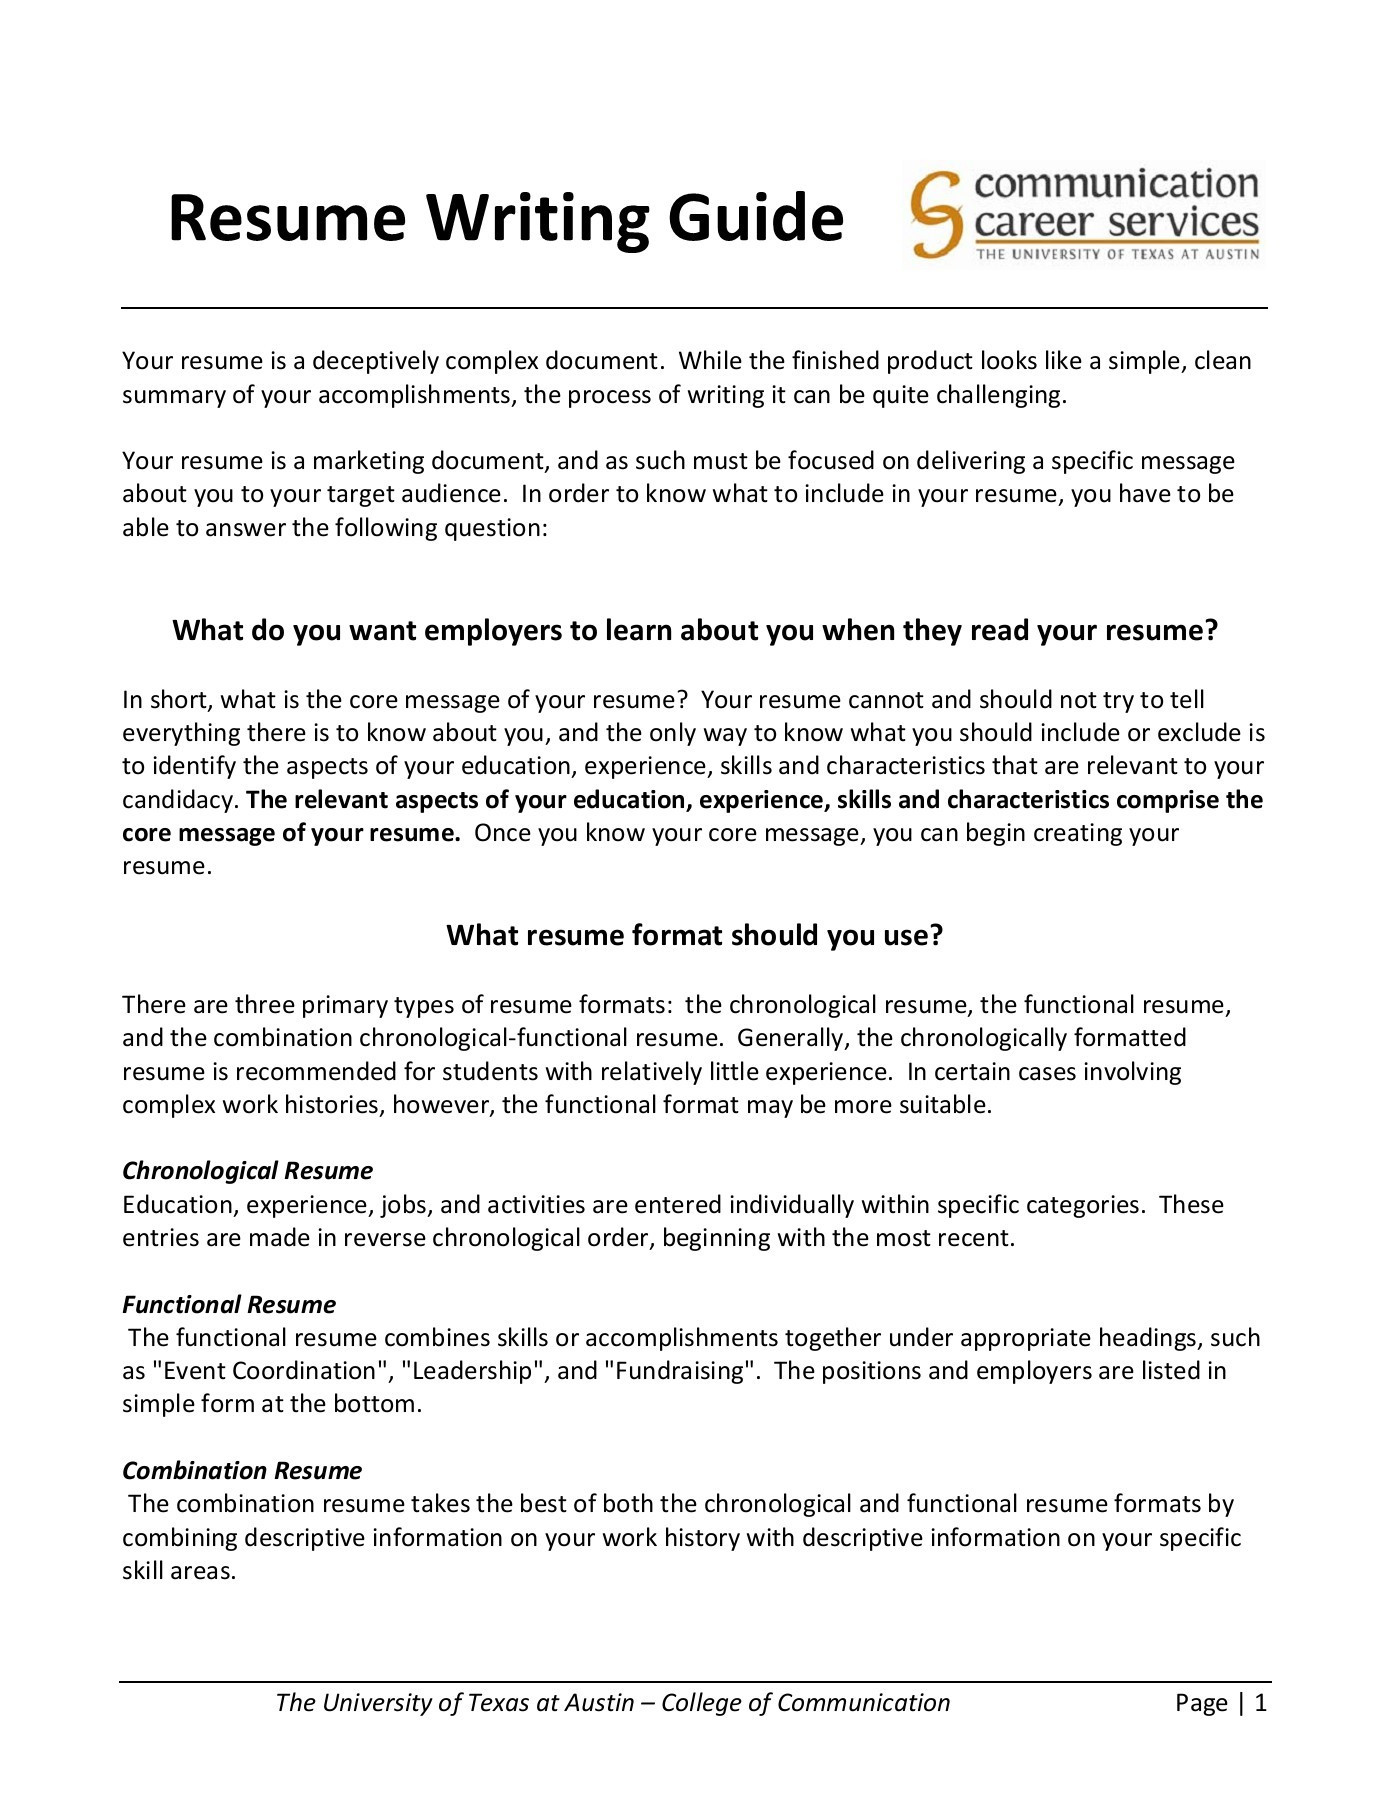 University Of Texas Mccombs Resume Template Resume Writing Guide – Moody College Of Communication Pages 1 – 20 …